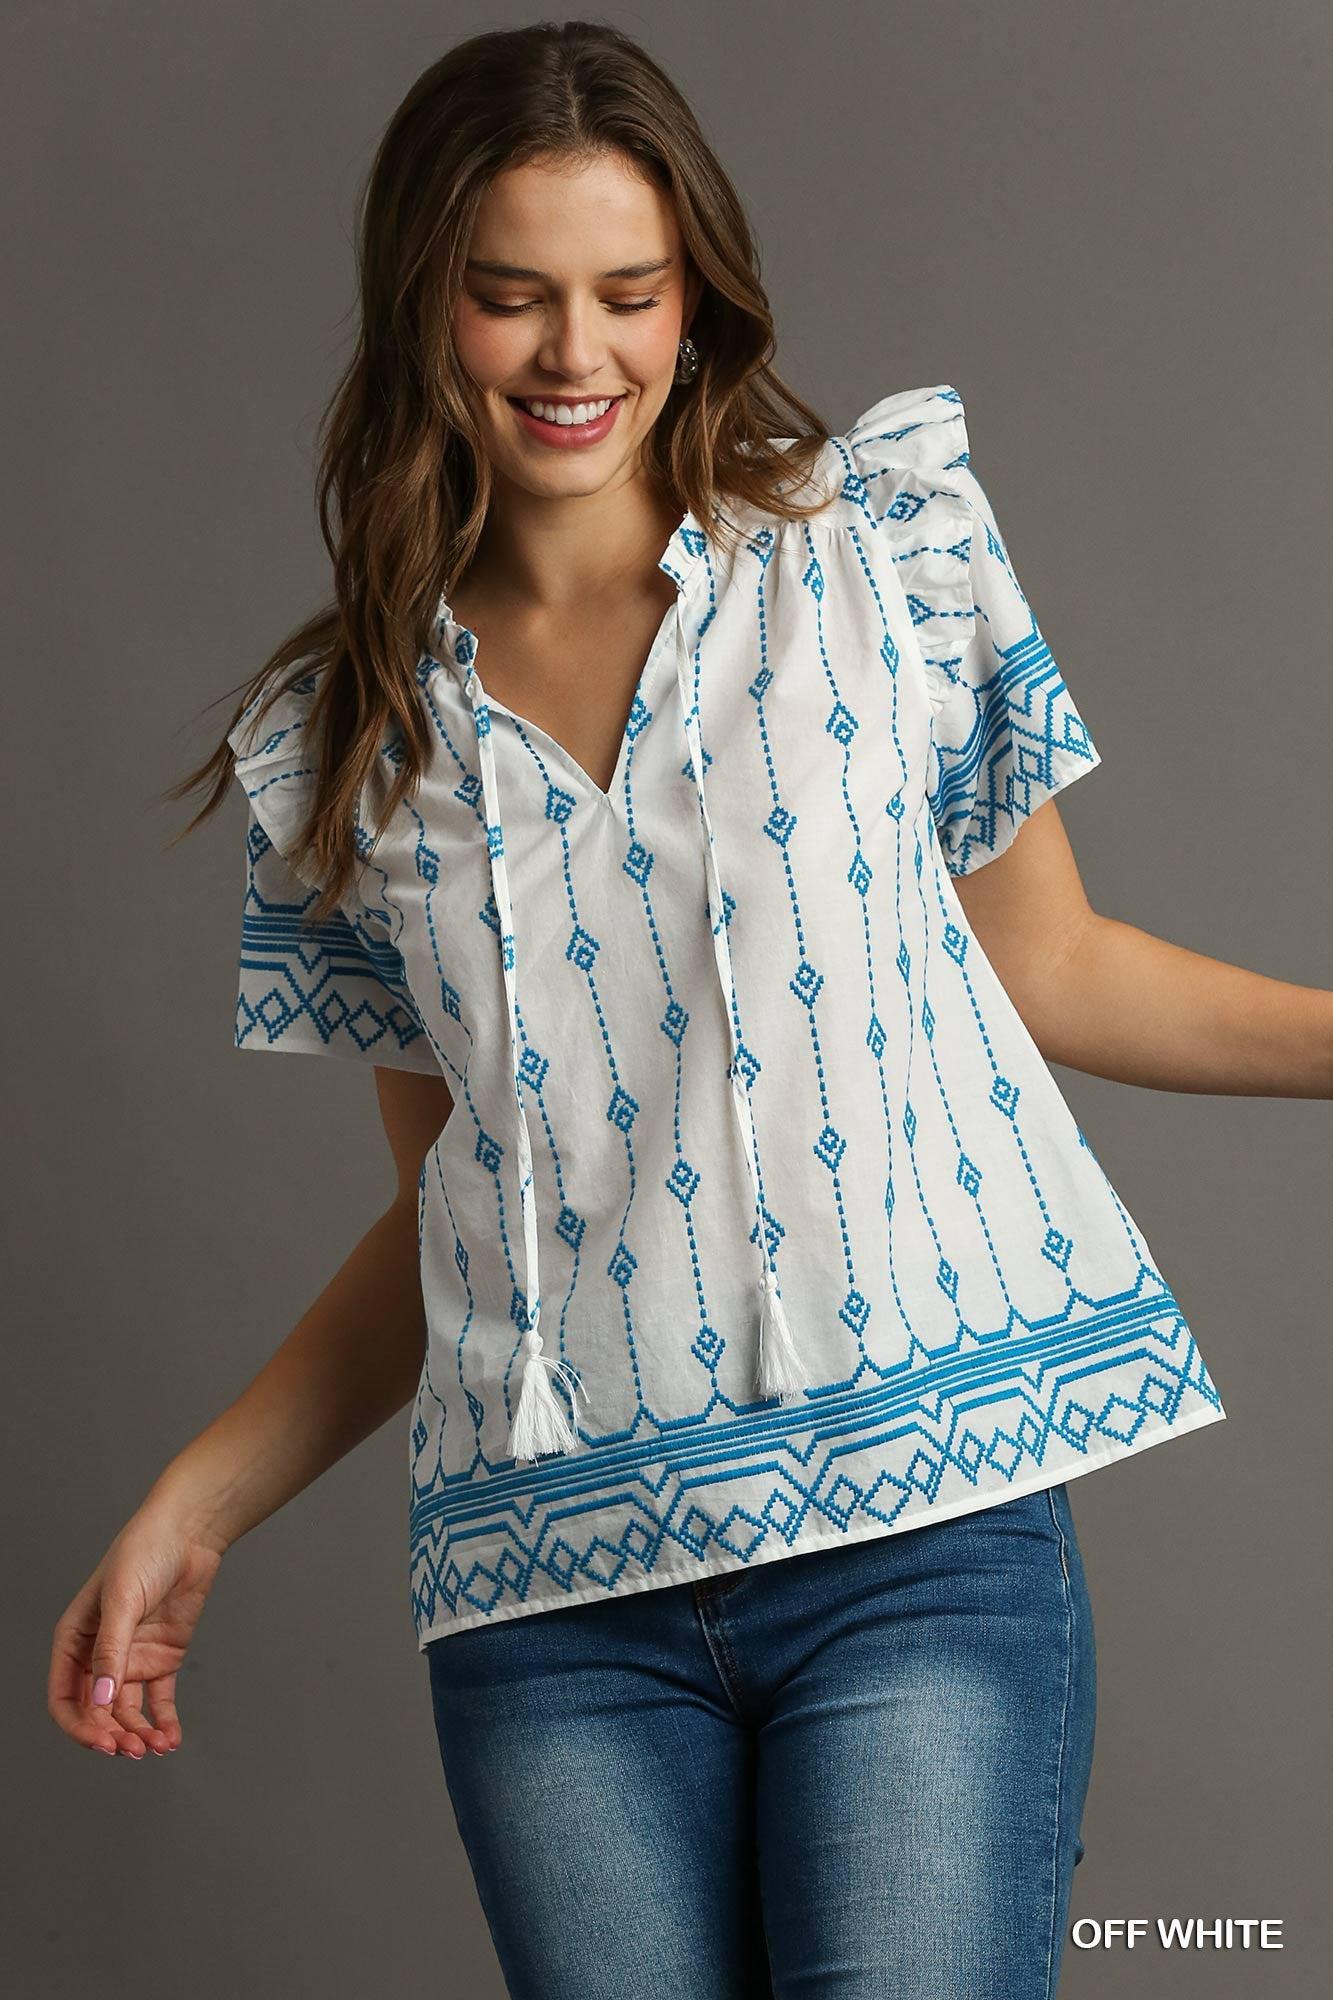 Embroidery Boxy Cut Ruffle Short Sleeve Top with Tie-Blue Hand Home